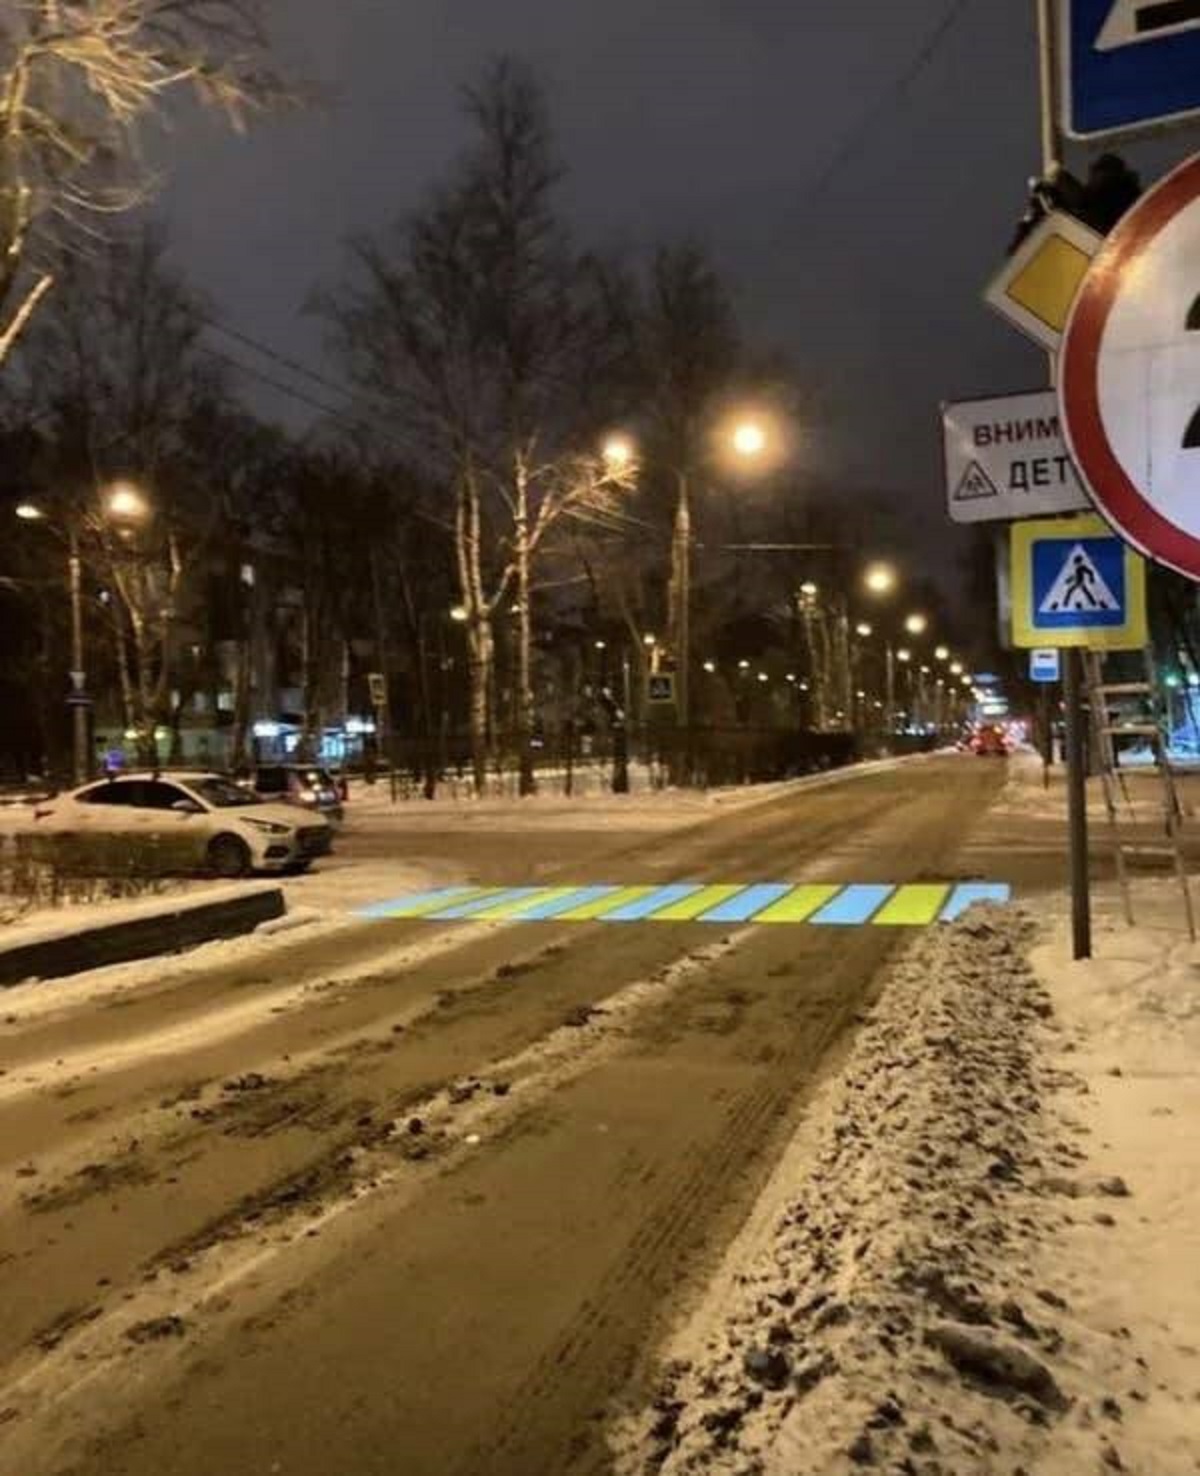 This projected crosswalk in Russia is actually such a good idea.